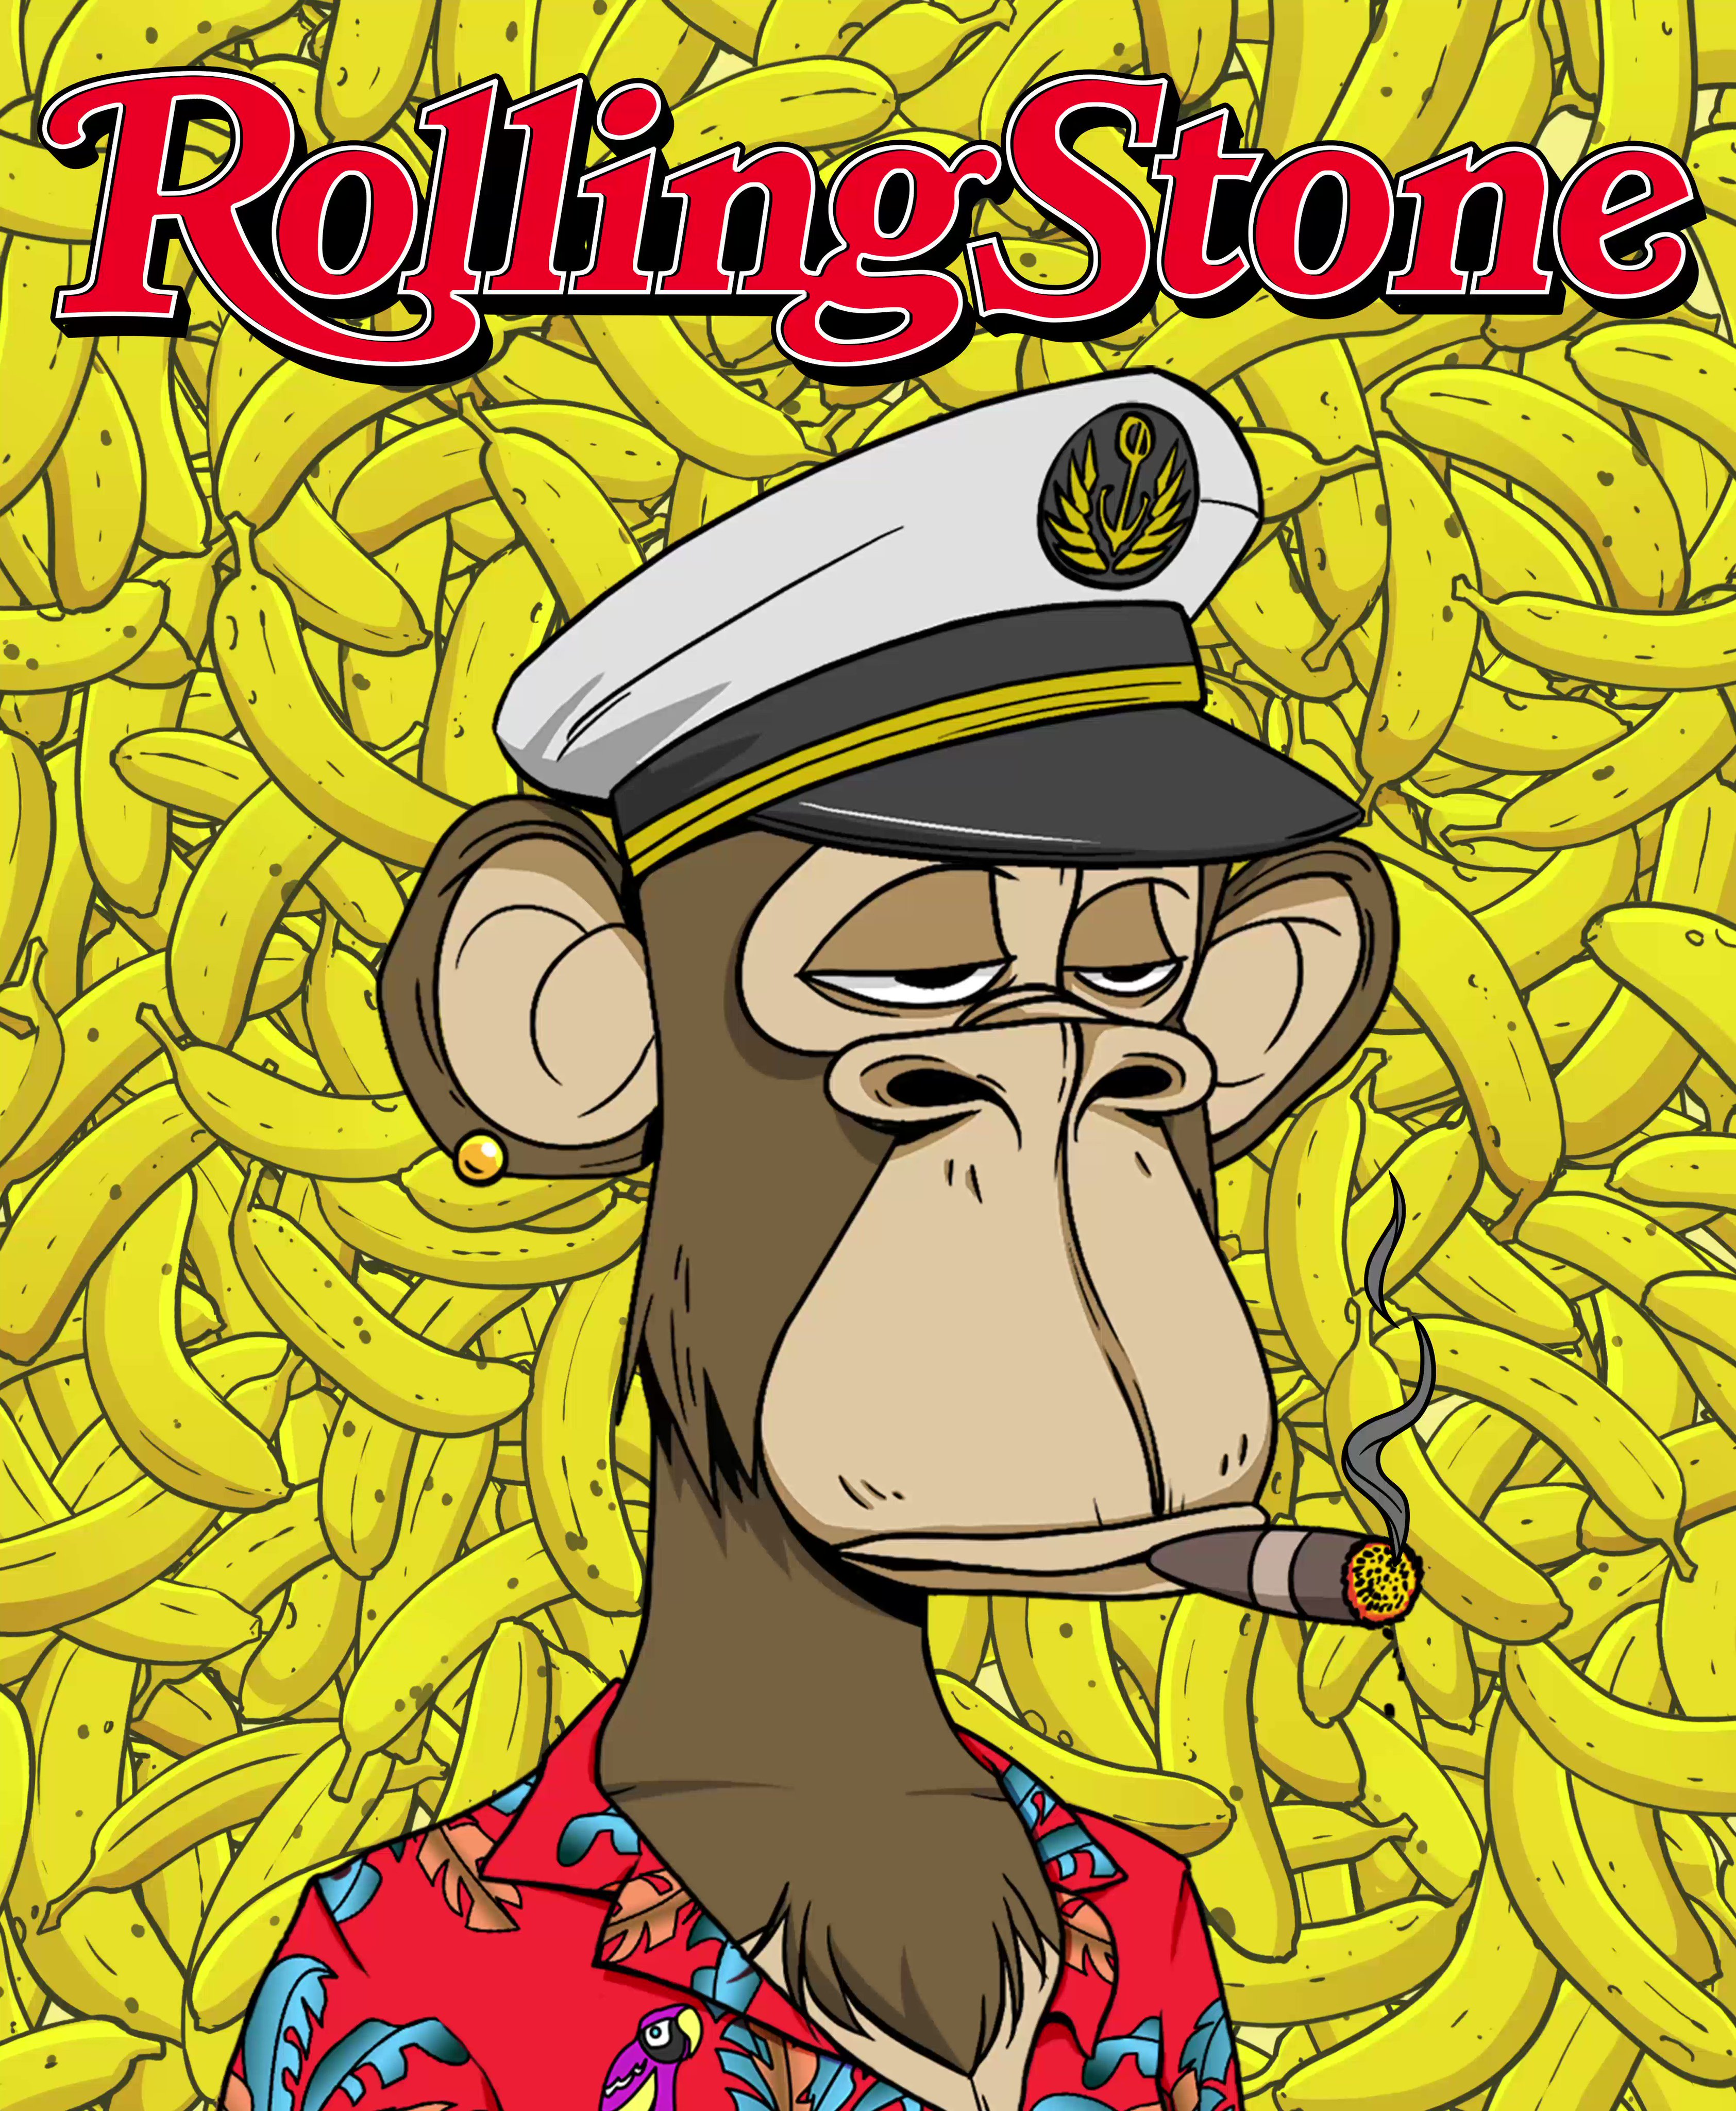 Bored Ape Yacht Club on First RollingStone NFT covers